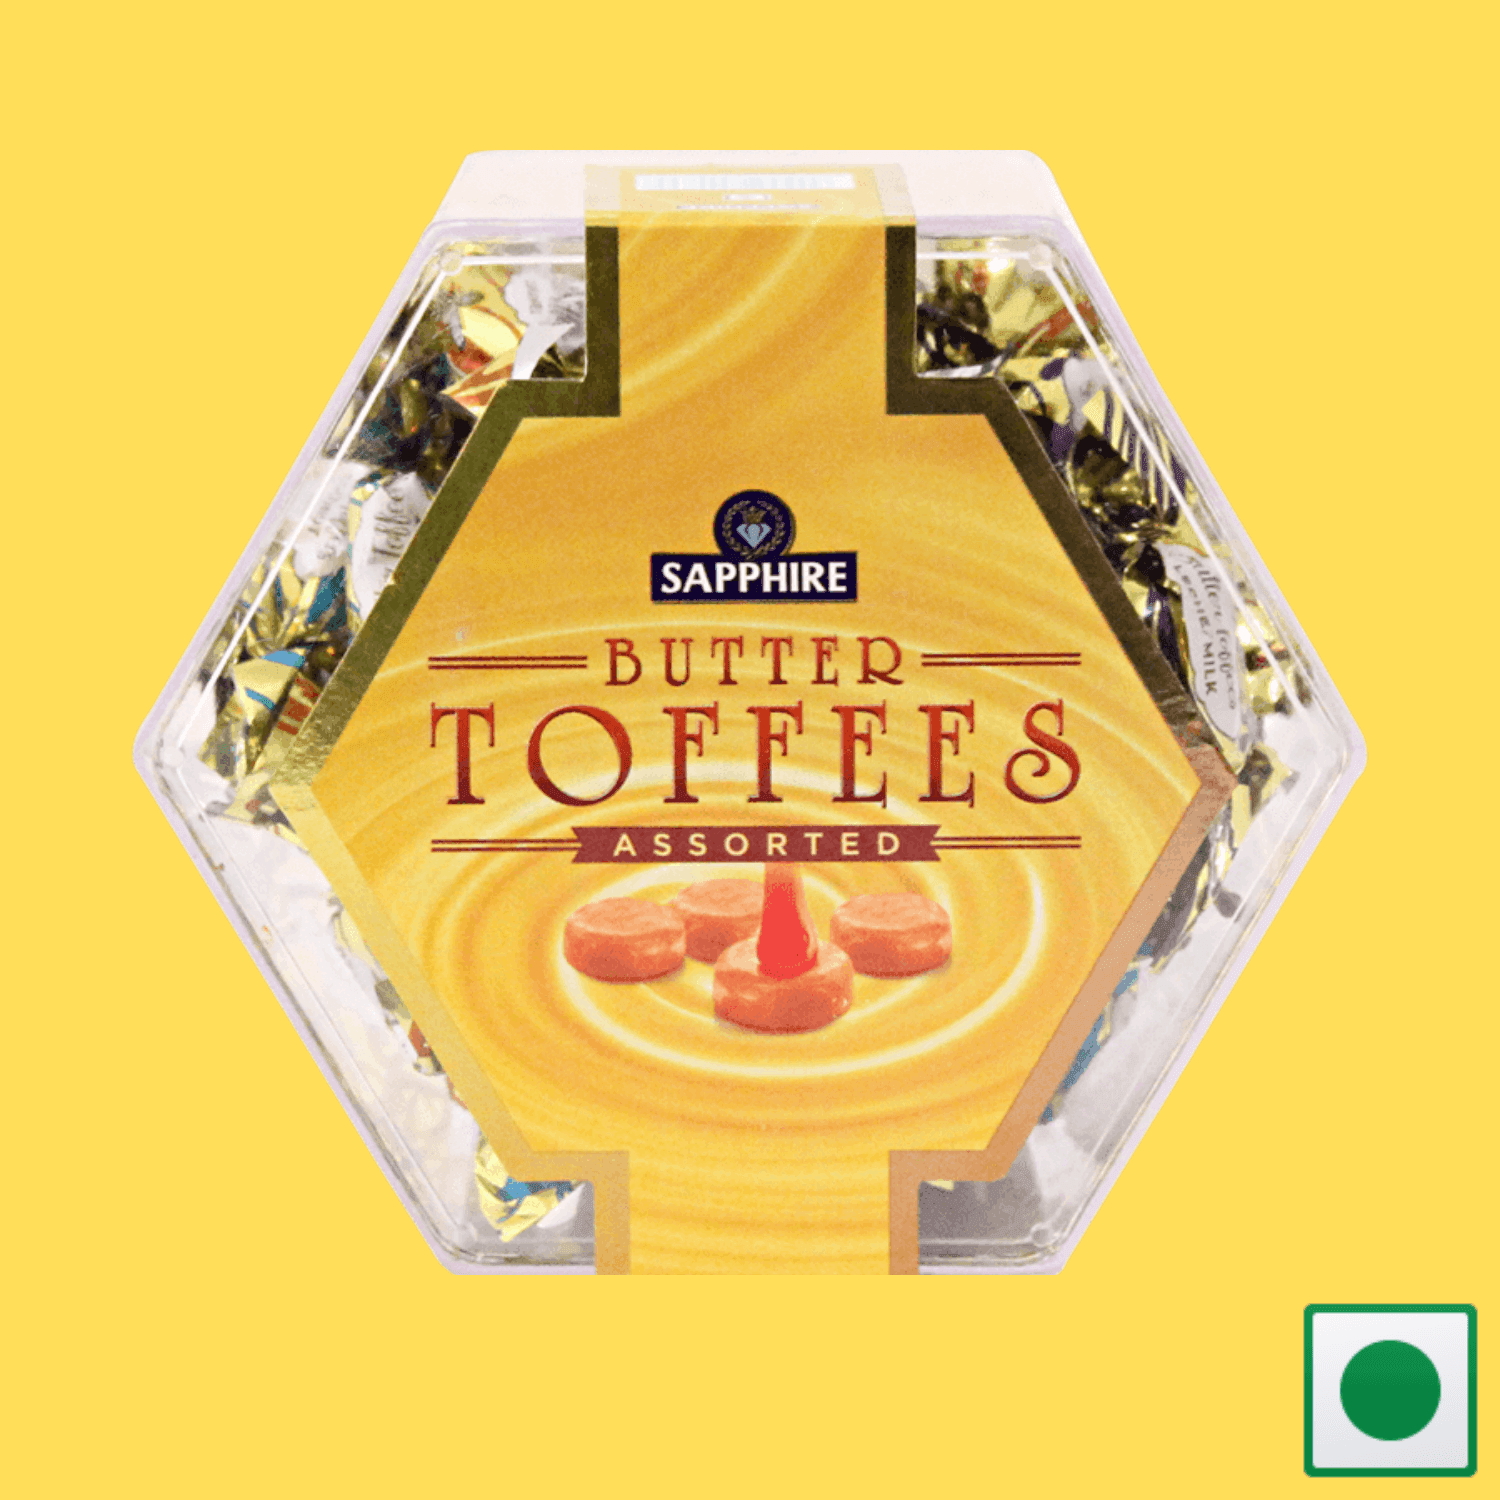 SAPPHIRE BUTTER TOFFEES ASSORTED 250G (Imported) - Super 7 Mart